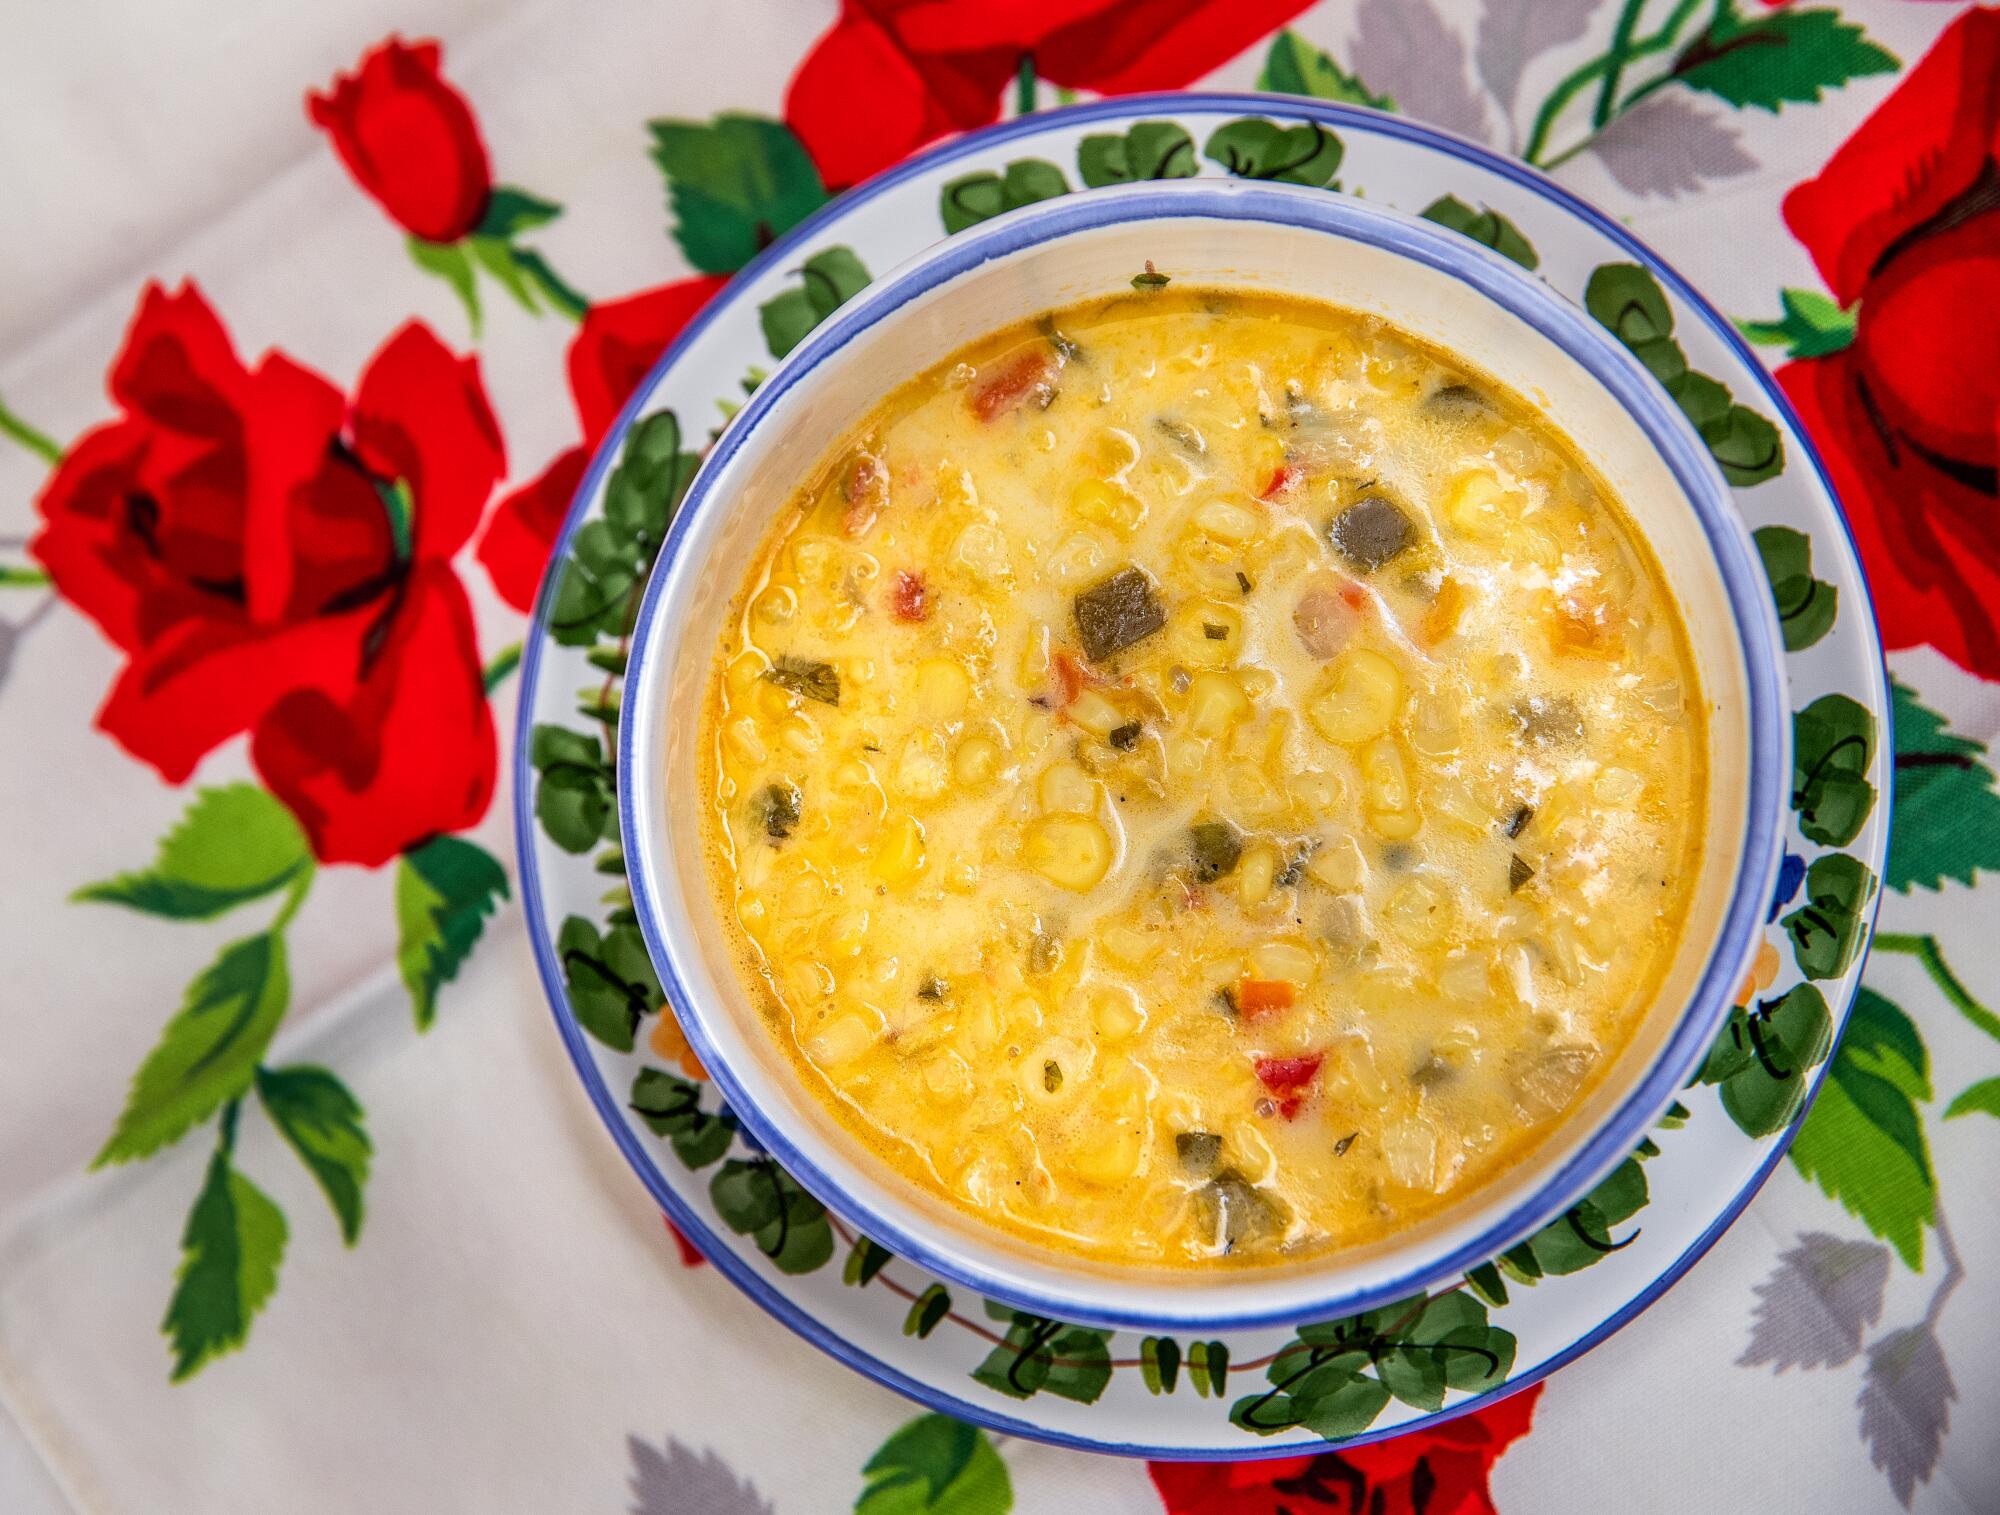 The spicy fresh corn chowder is a house favorite.